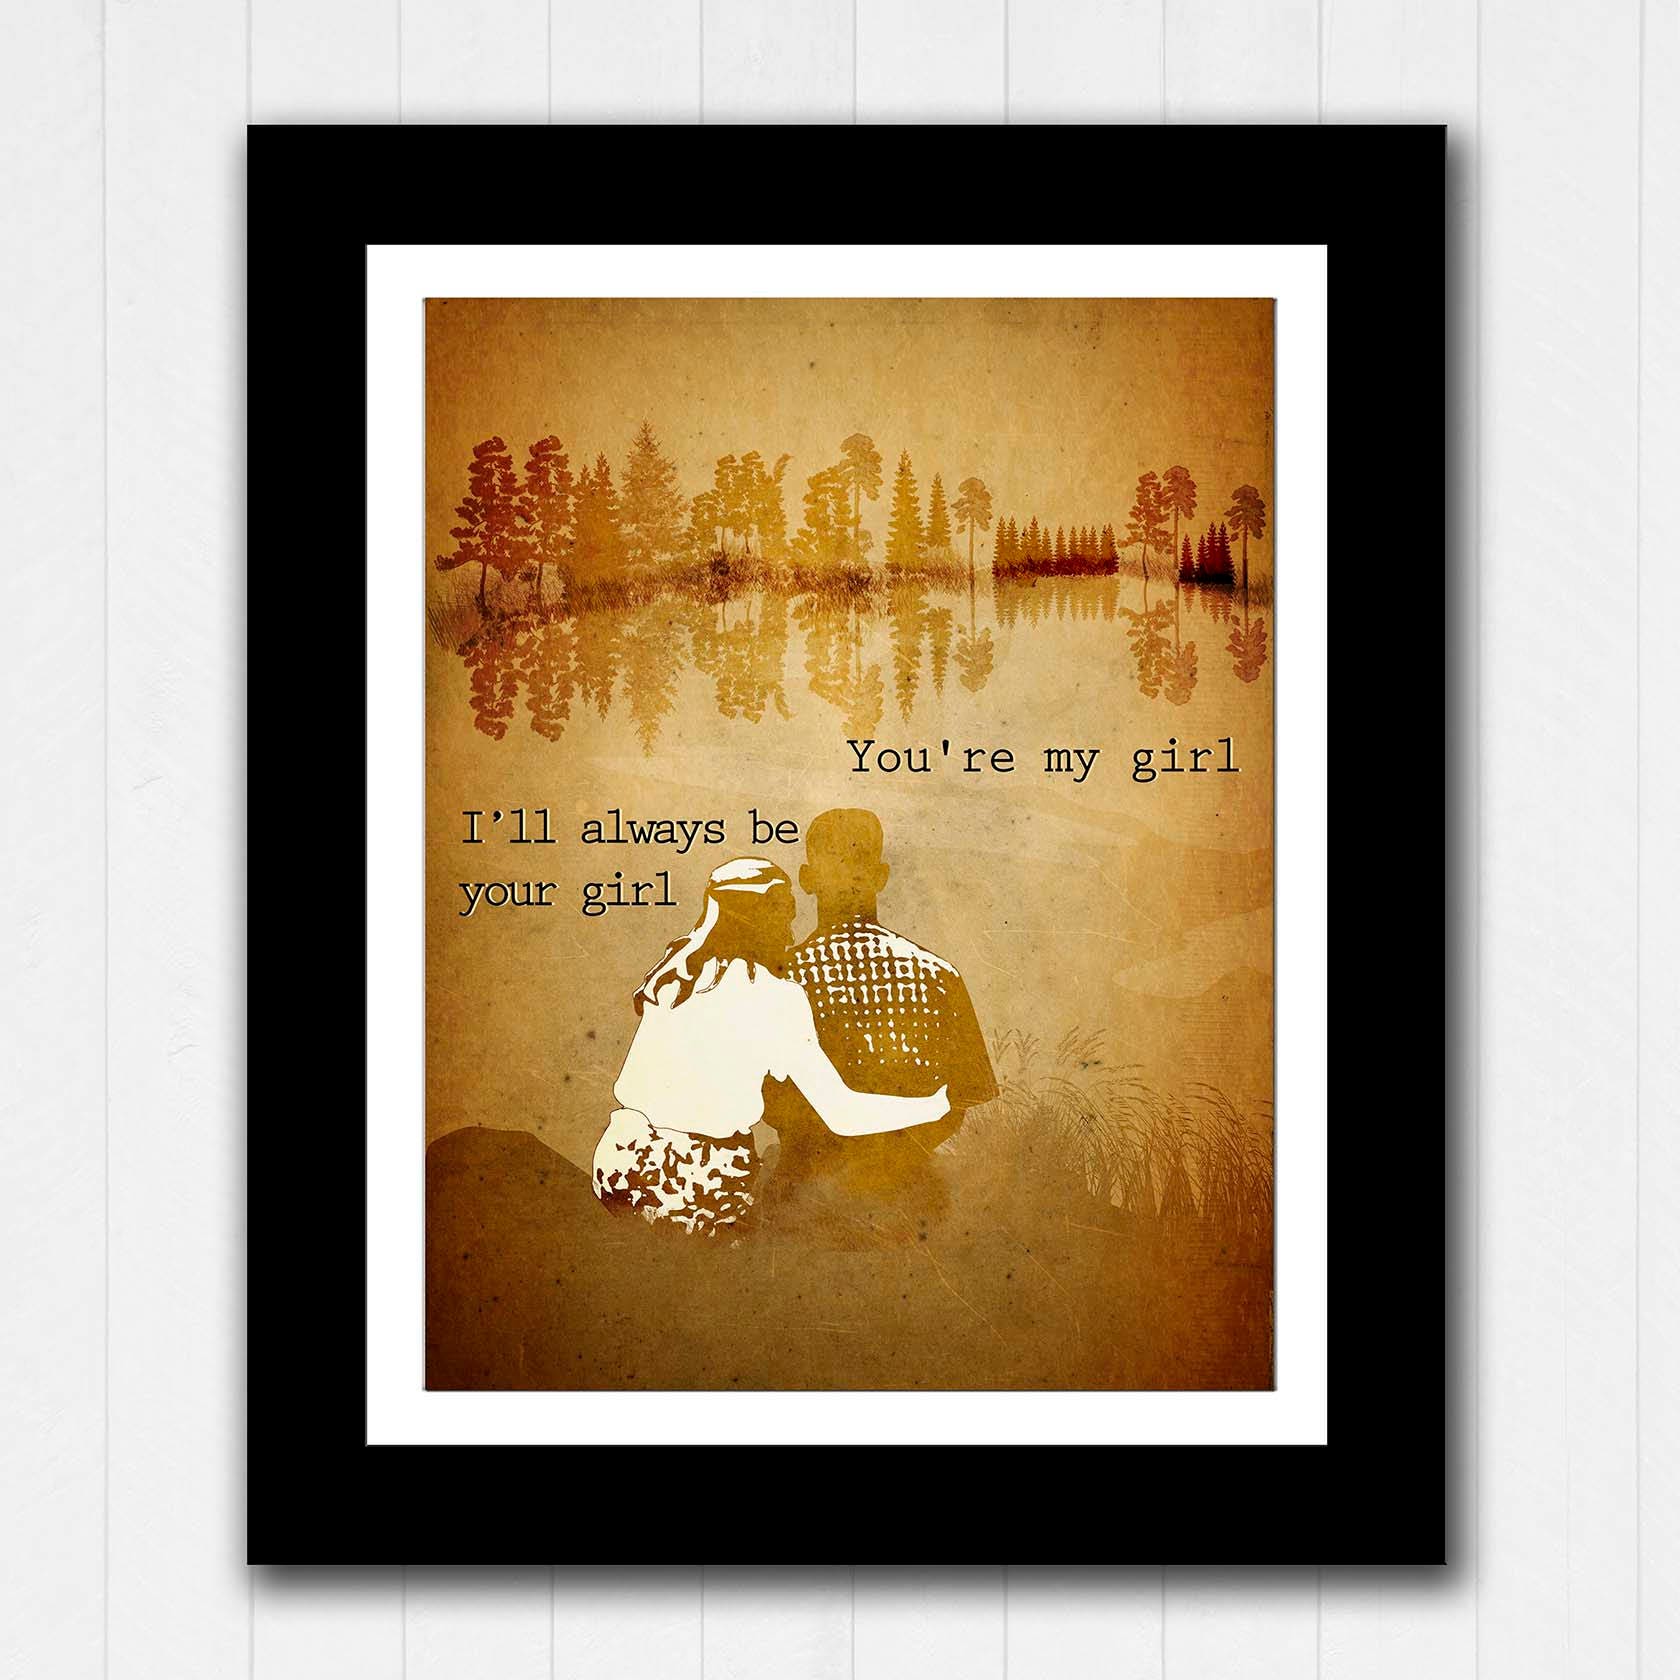 Forrest Gump and Jenny Love Quote Buy 2 Get 1 FREE | Etsy